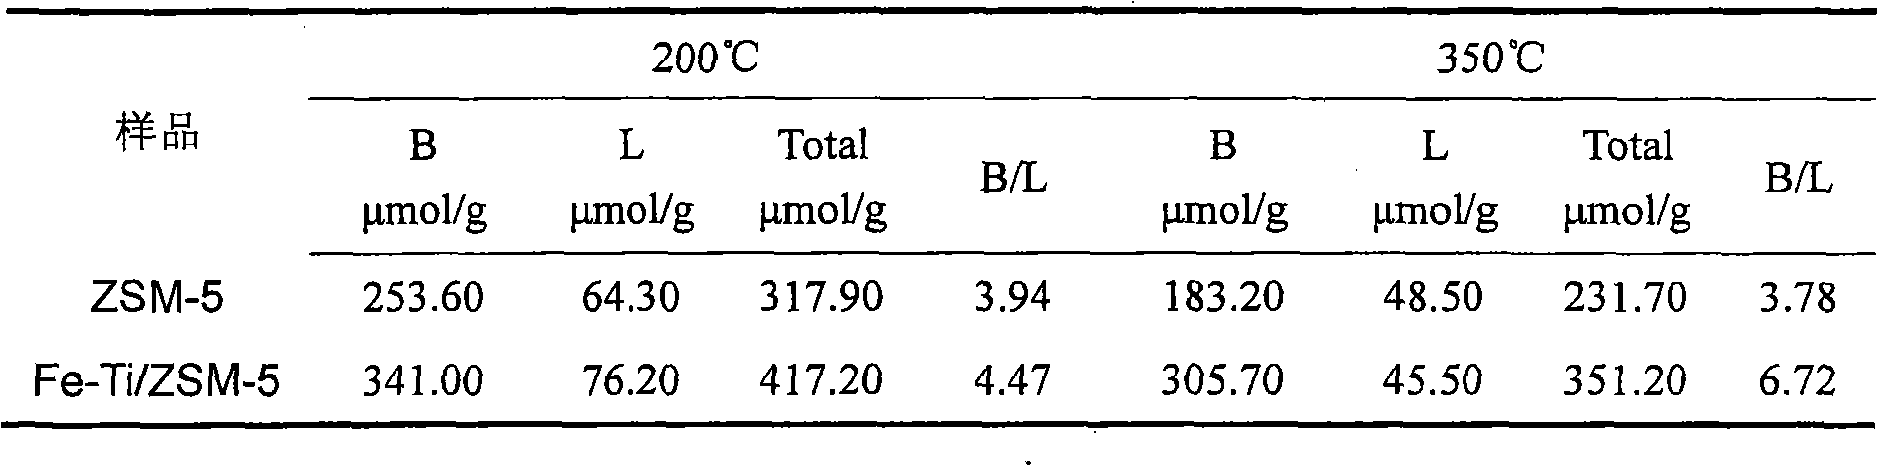 Method for improving B acid content of ZSM-5 molecular sieve and realizing yield increase of light olefin